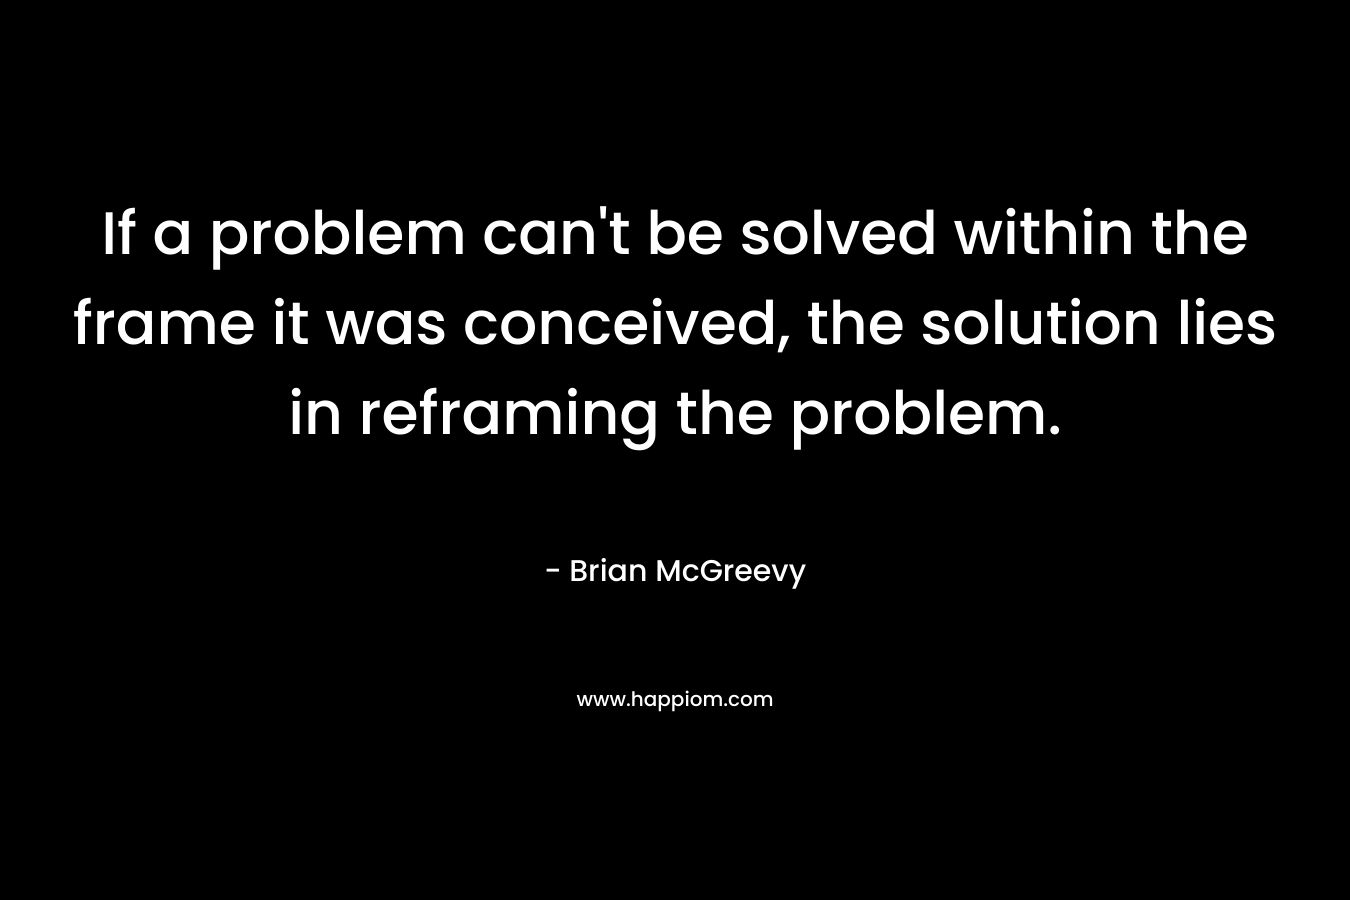 If a problem can't be solved within the frame it was conceived, the solution lies in reframing the problem.